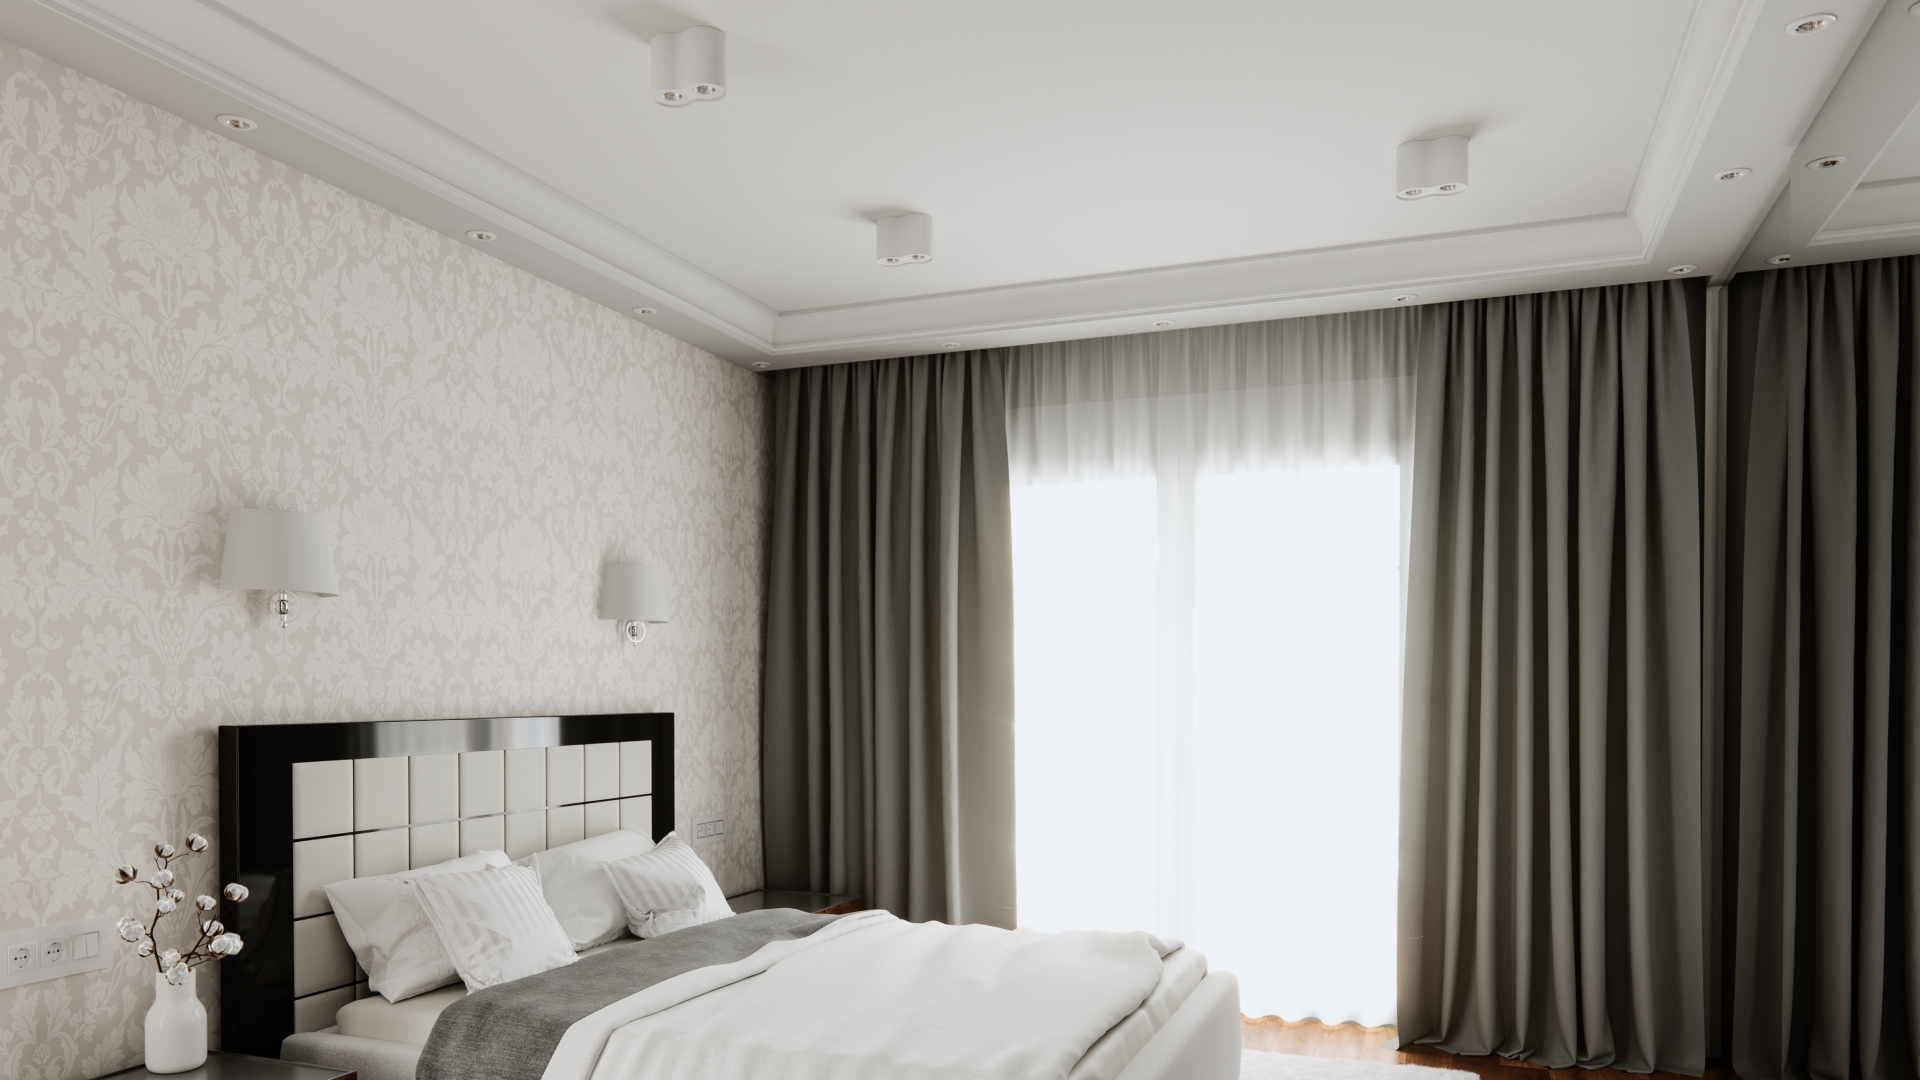 Halogen lights and surface-mounted LED luminaires in the bedroom